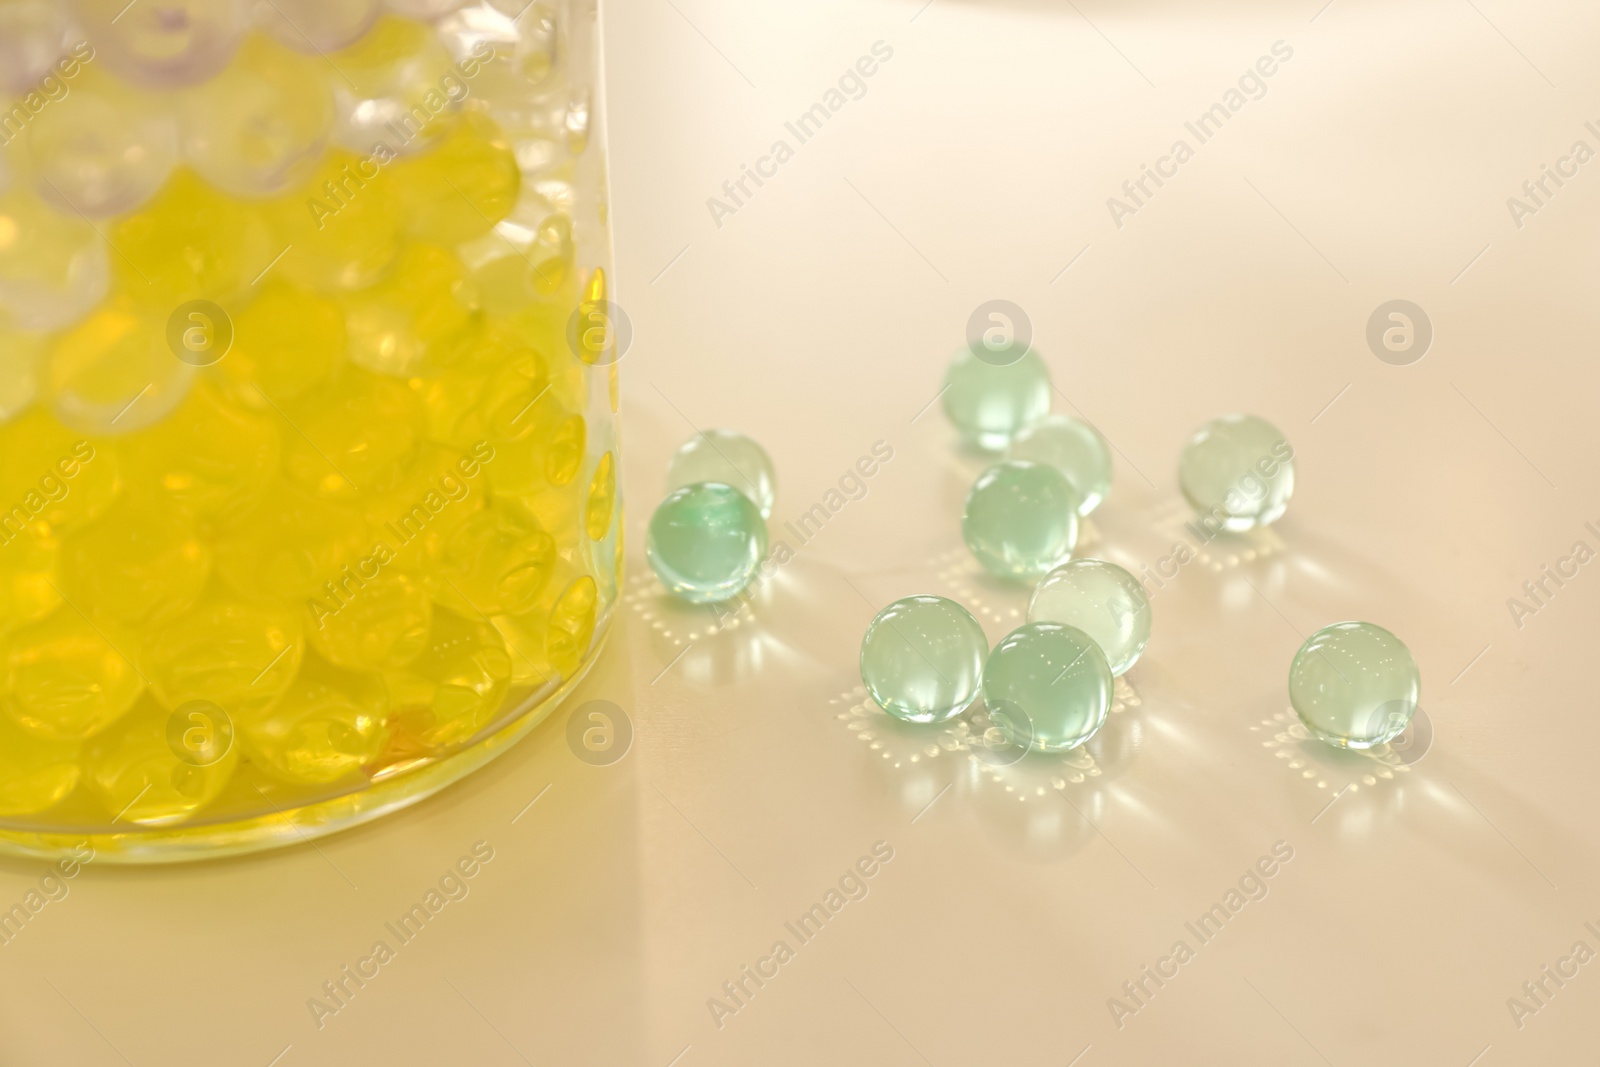 Photo of Different color fillers and glass vase on white table, closeup. Water beads